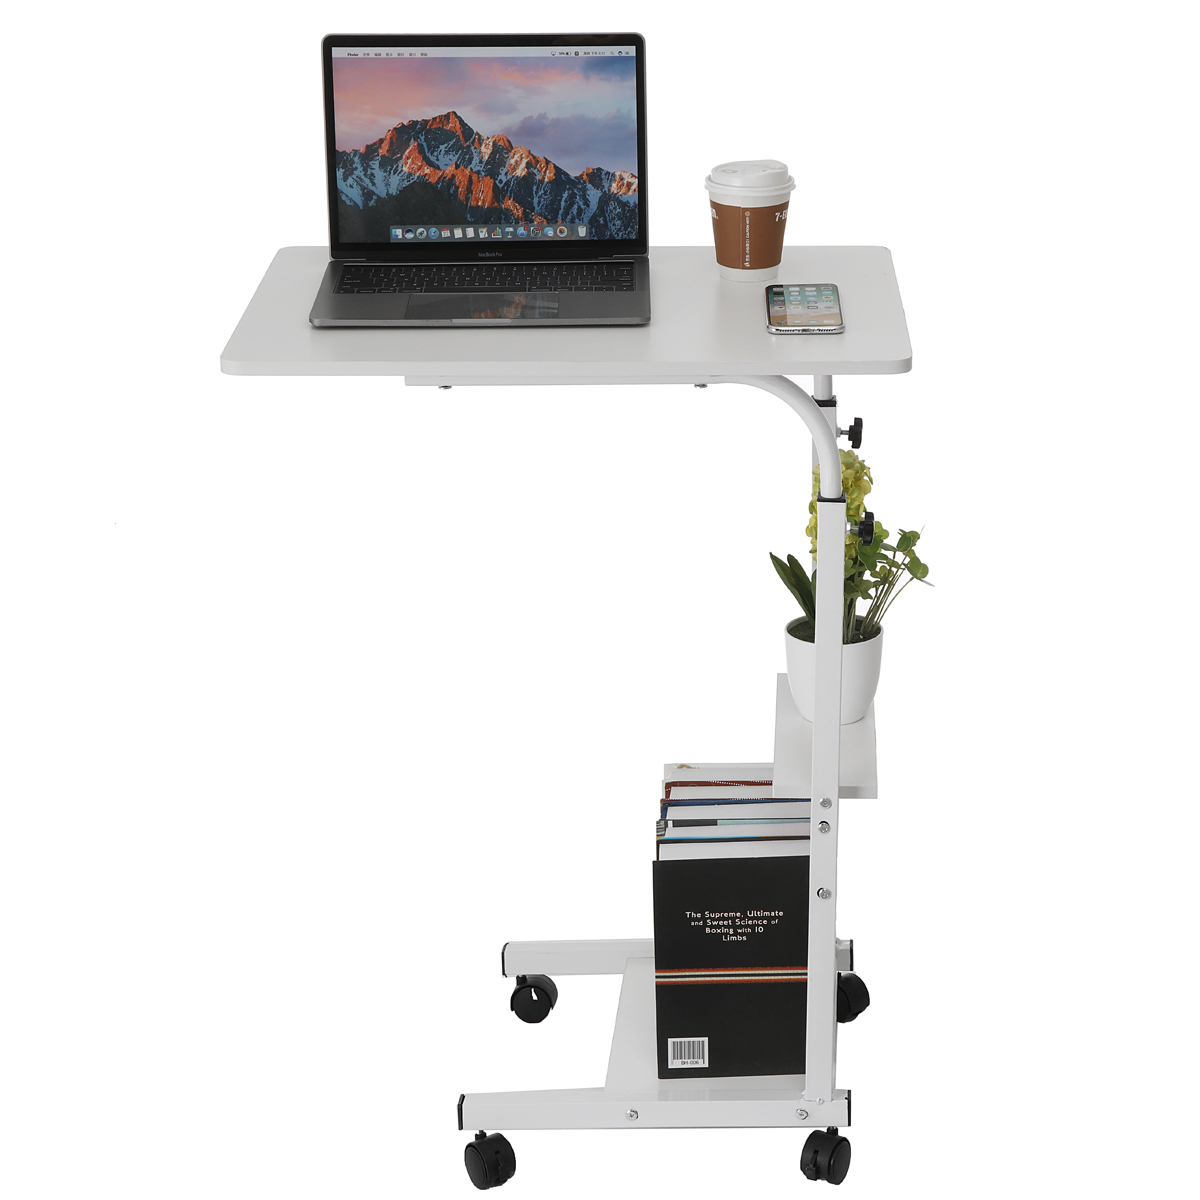 Movable-Laptop-Desk-Adjustable-Height-Computer-Notebook-Desk-Writing-Study-Table-Bedside-Tray-with-2-1750182-9